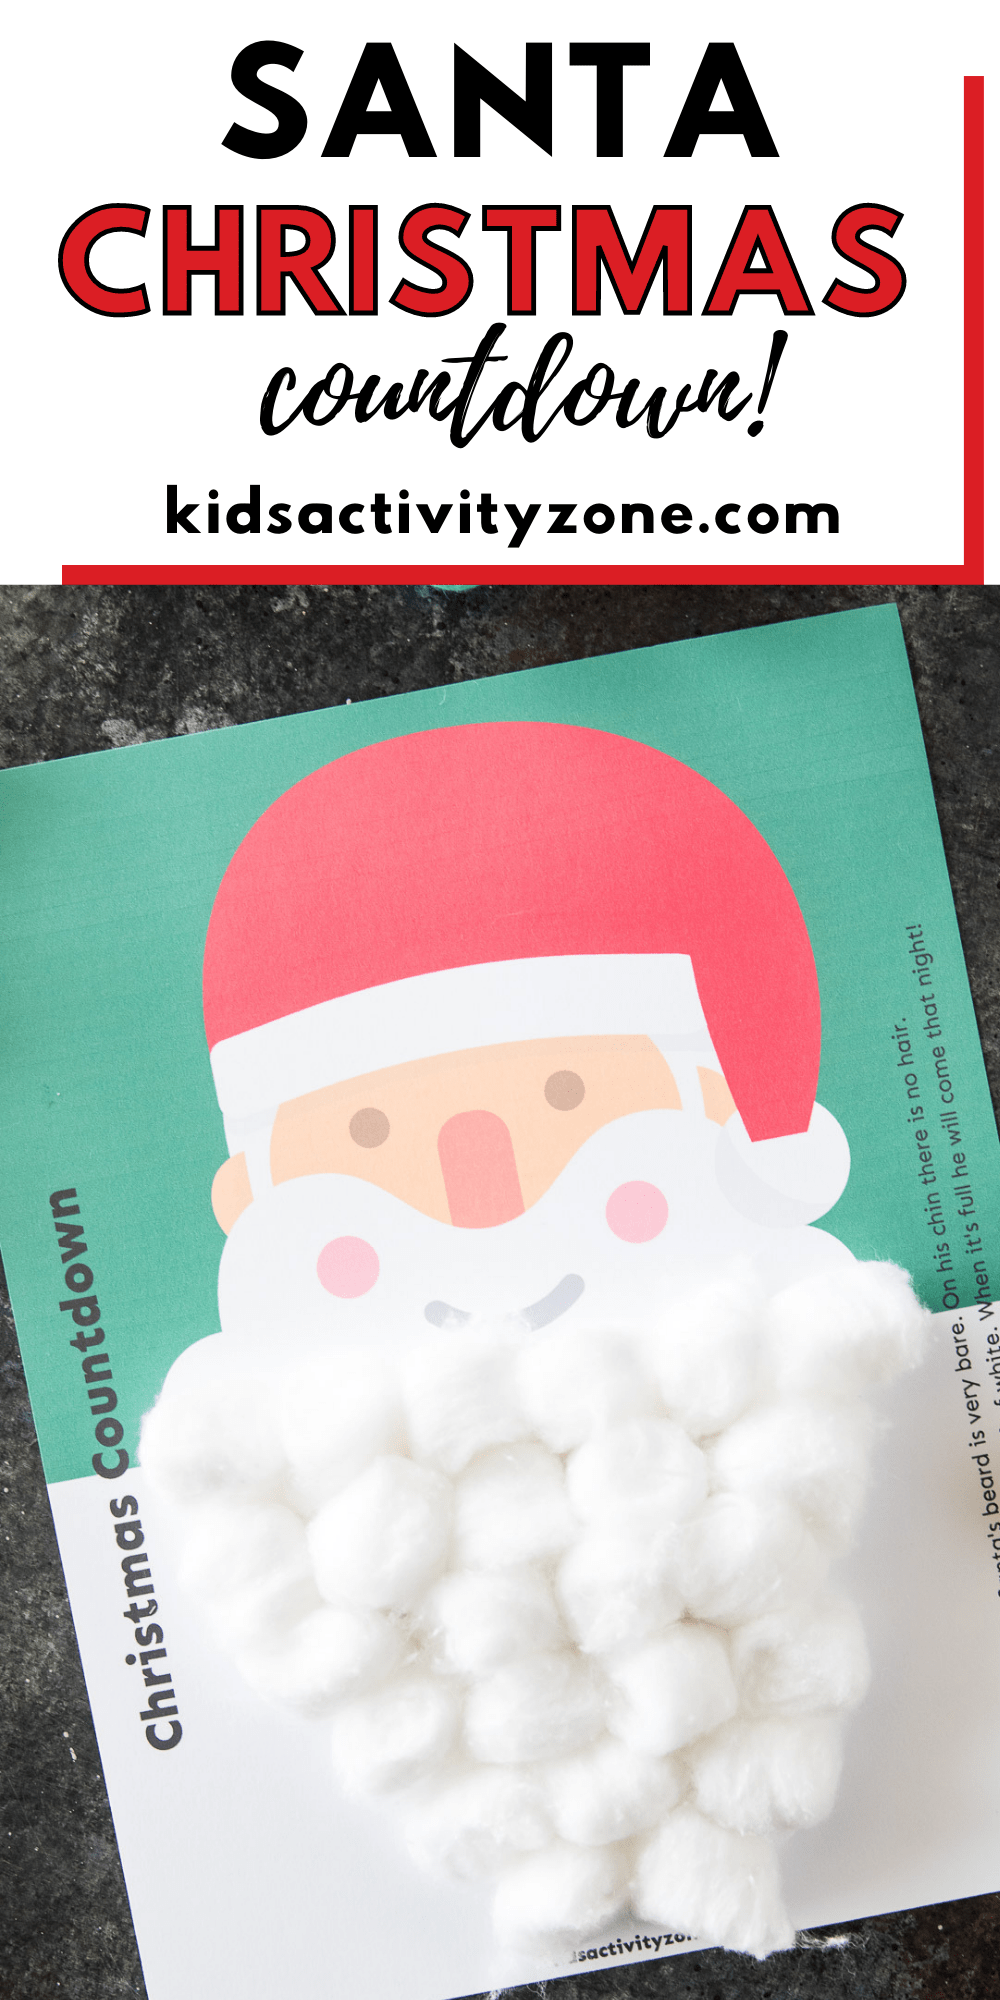 Need a quick and easy Christmas Countdown for the kids? This adorable Santa printable is what you need. Simply glue on a cotton ball on each day of the month to form a beard. When you are done Santa comes the next day!